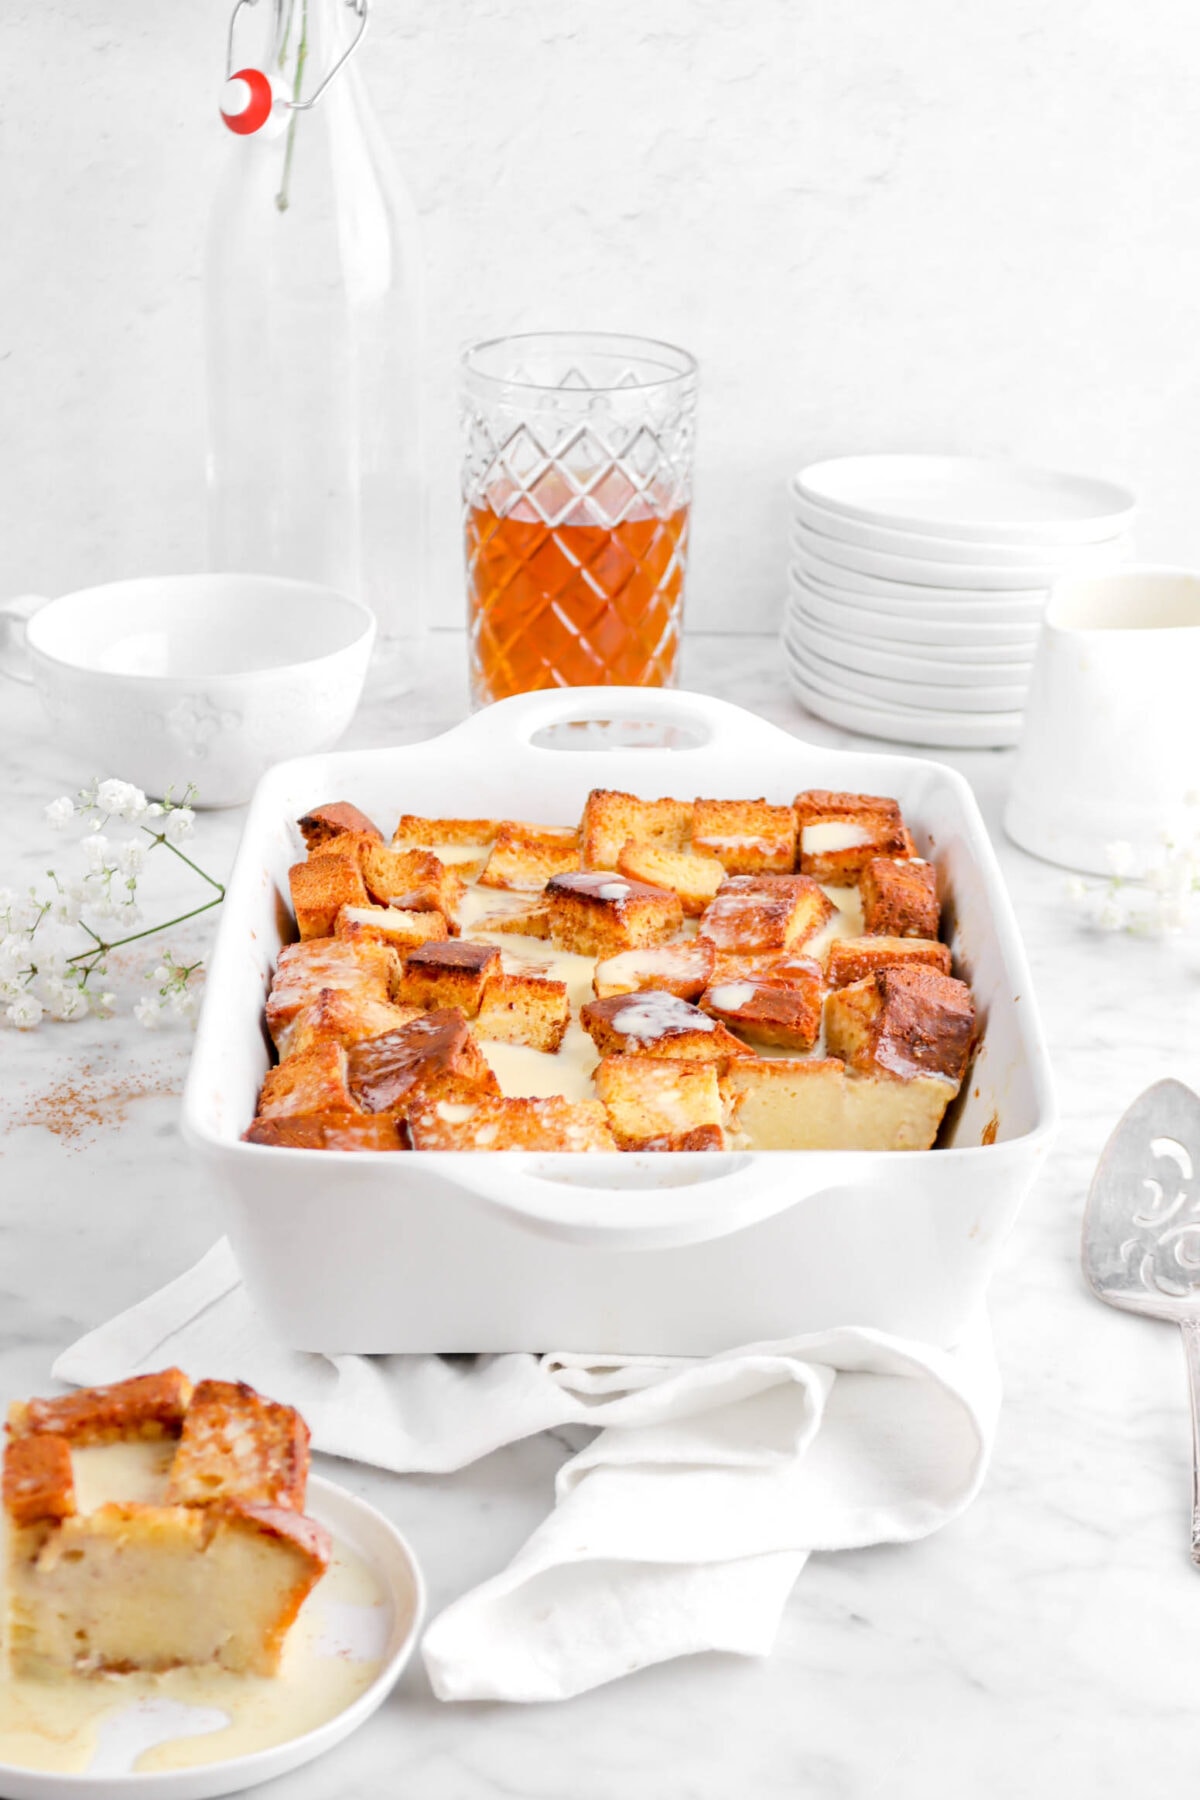 front shot of bread pudding casserole with slice on white plate in front, a cake knife, flowers, glass of bourbon, stack of plates, and coffee mug behind